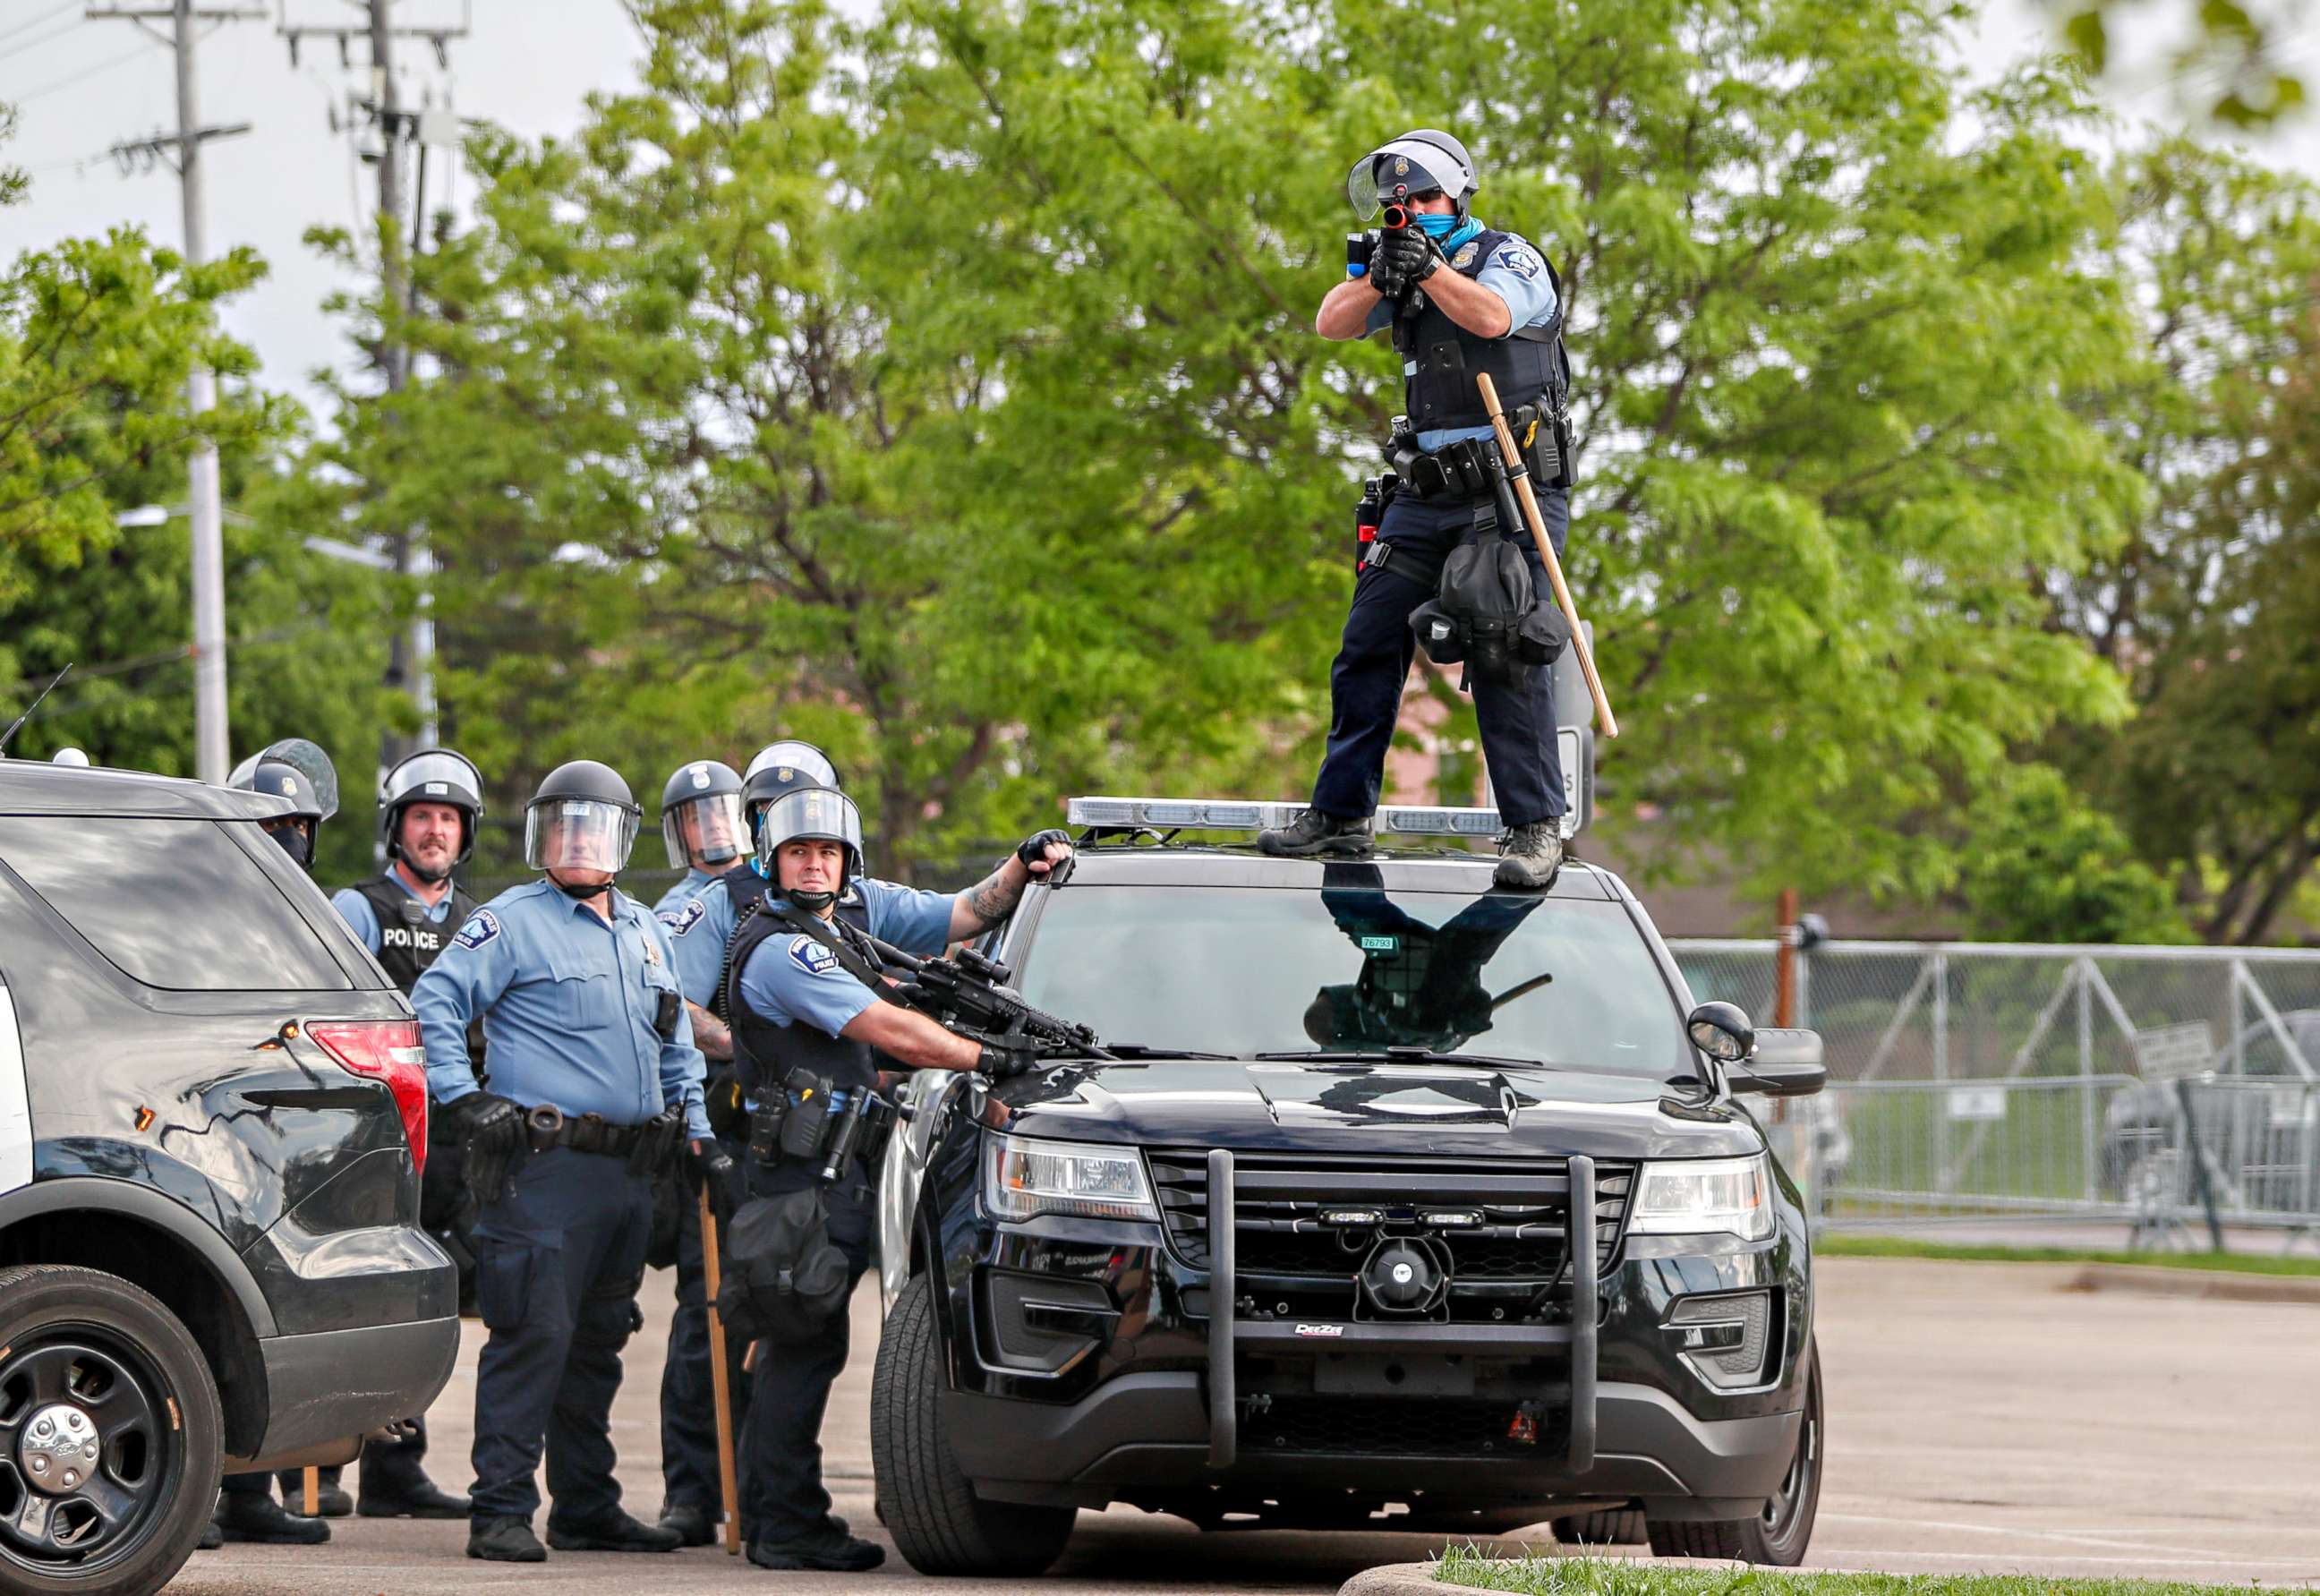 PHOTO: A police officer aims before firing at protestors gathered near the Minneapolis Police third precinct after the death of an African-American man, George Floyd, in Minneapolis, May 27, 2020.